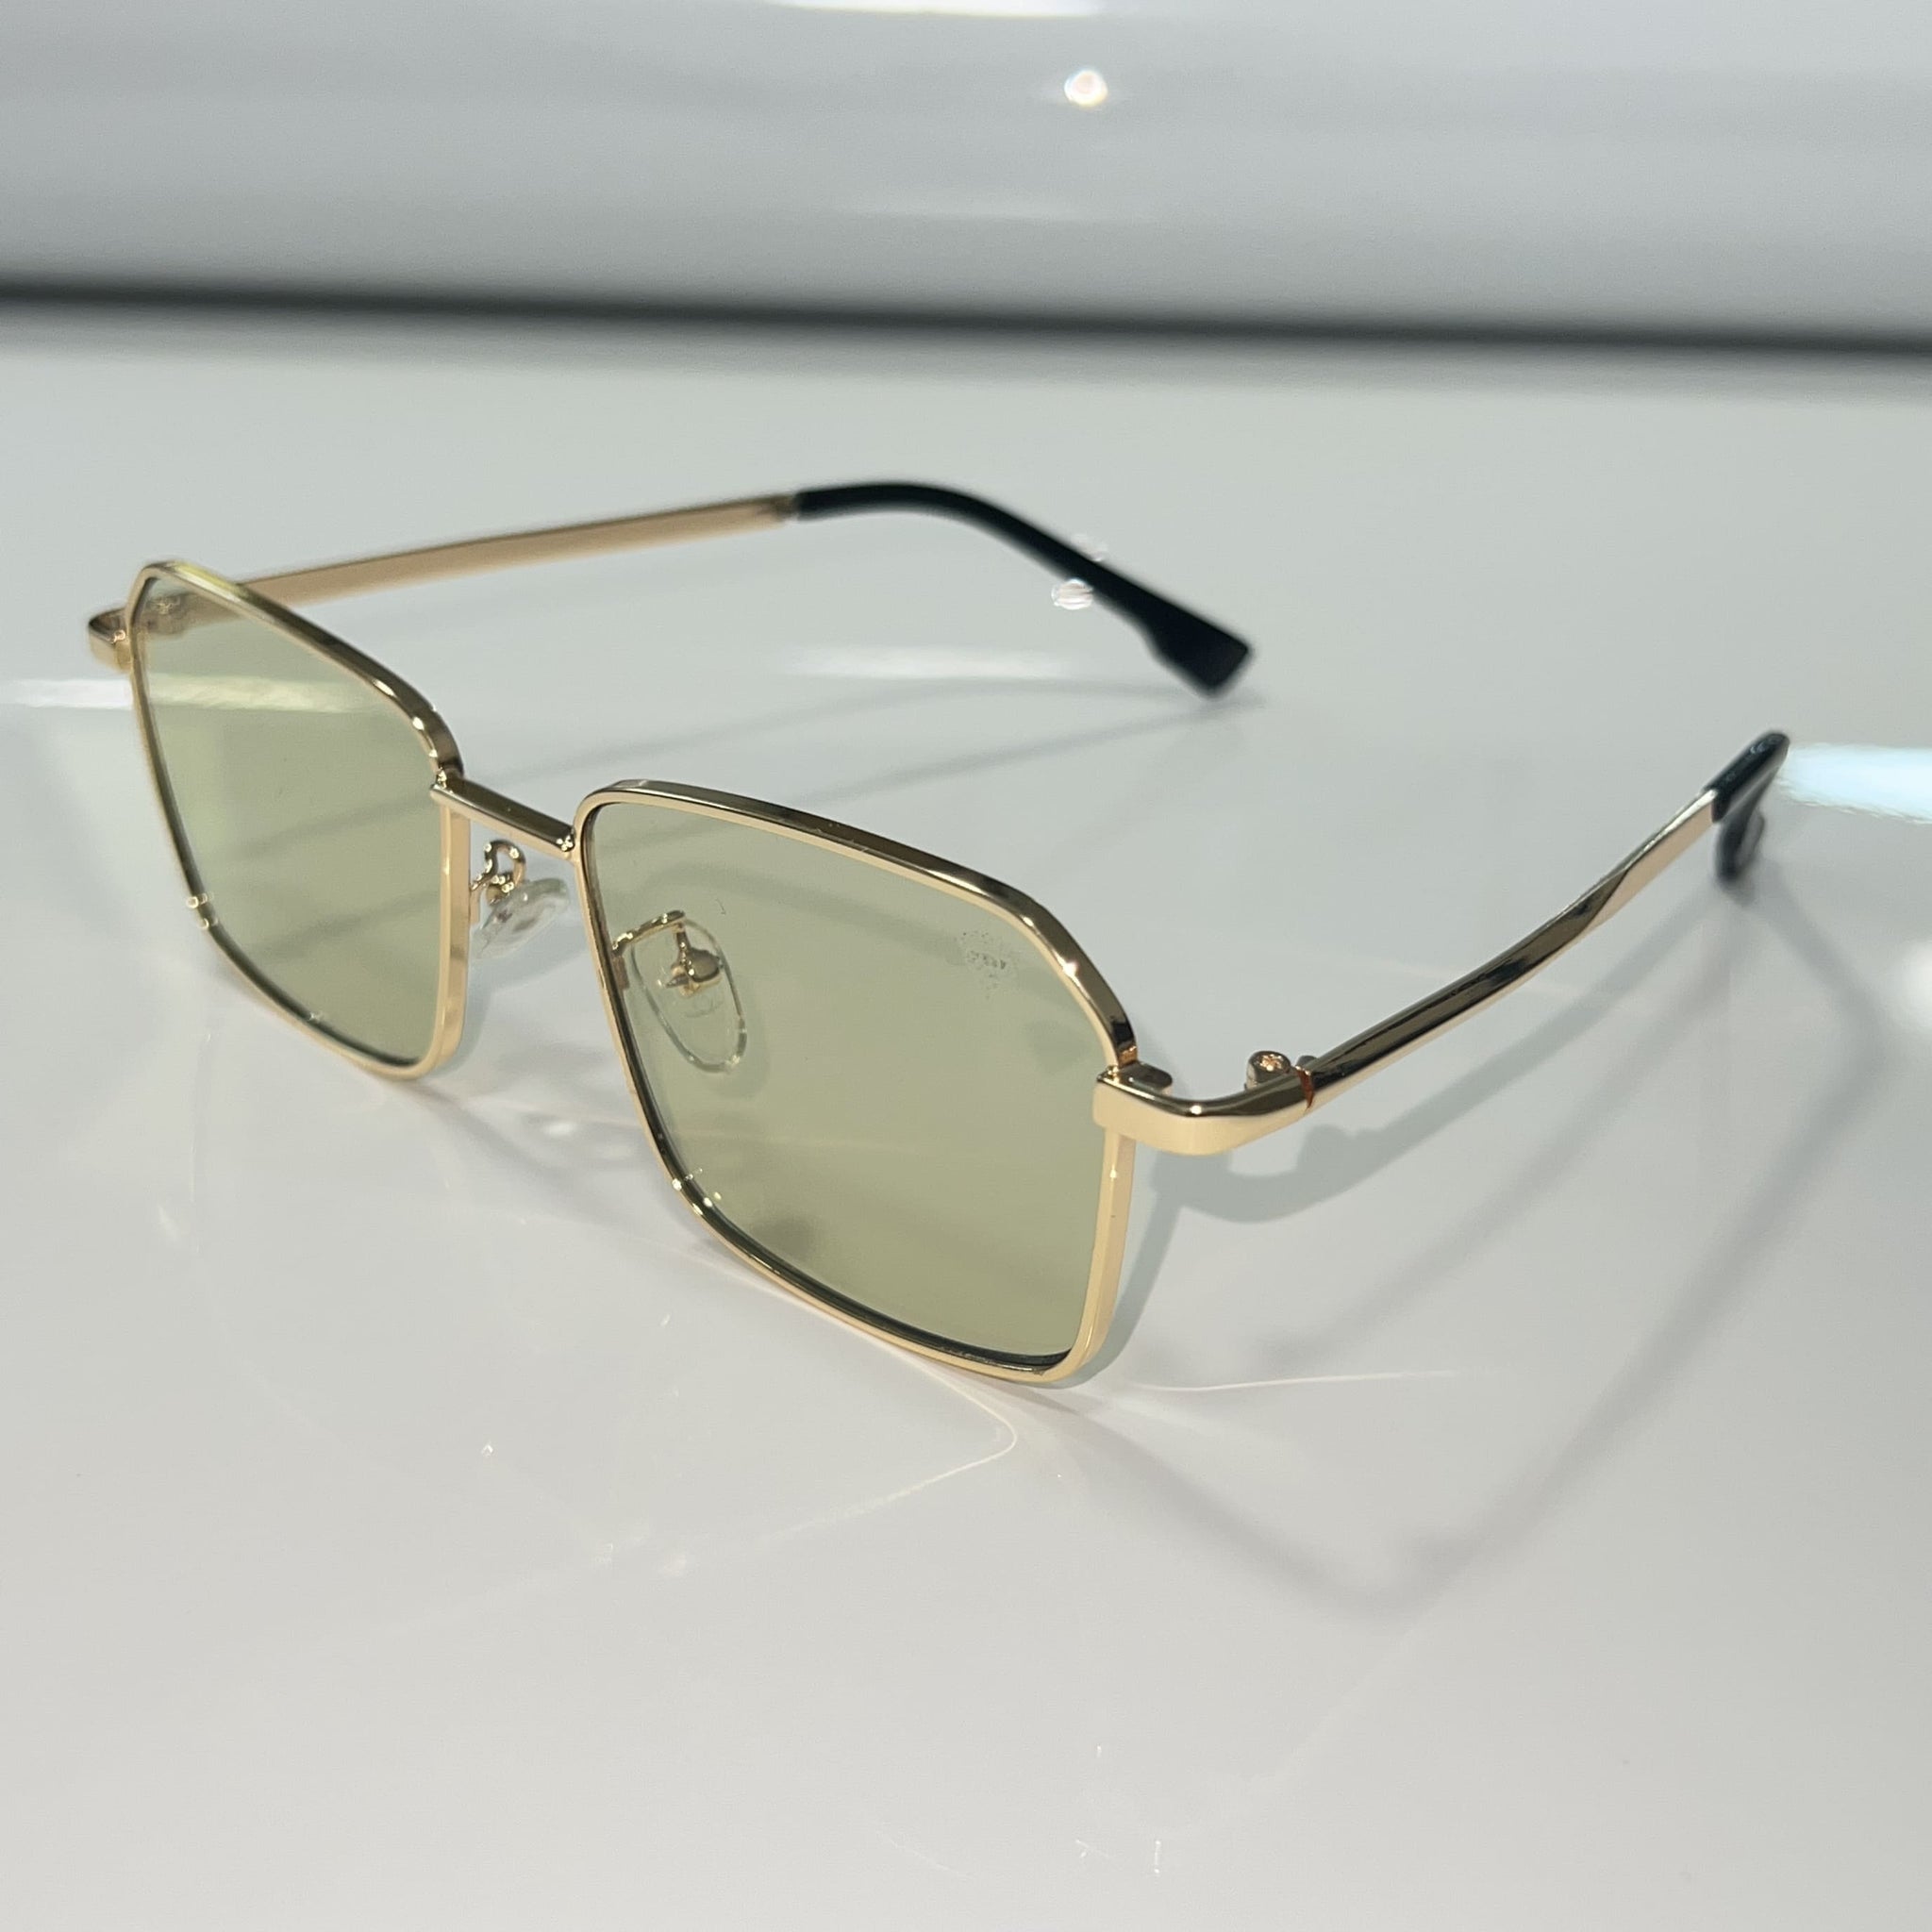 Celebrity Glasses - 14k gold plated - Sehgal Glasses - Green Shade